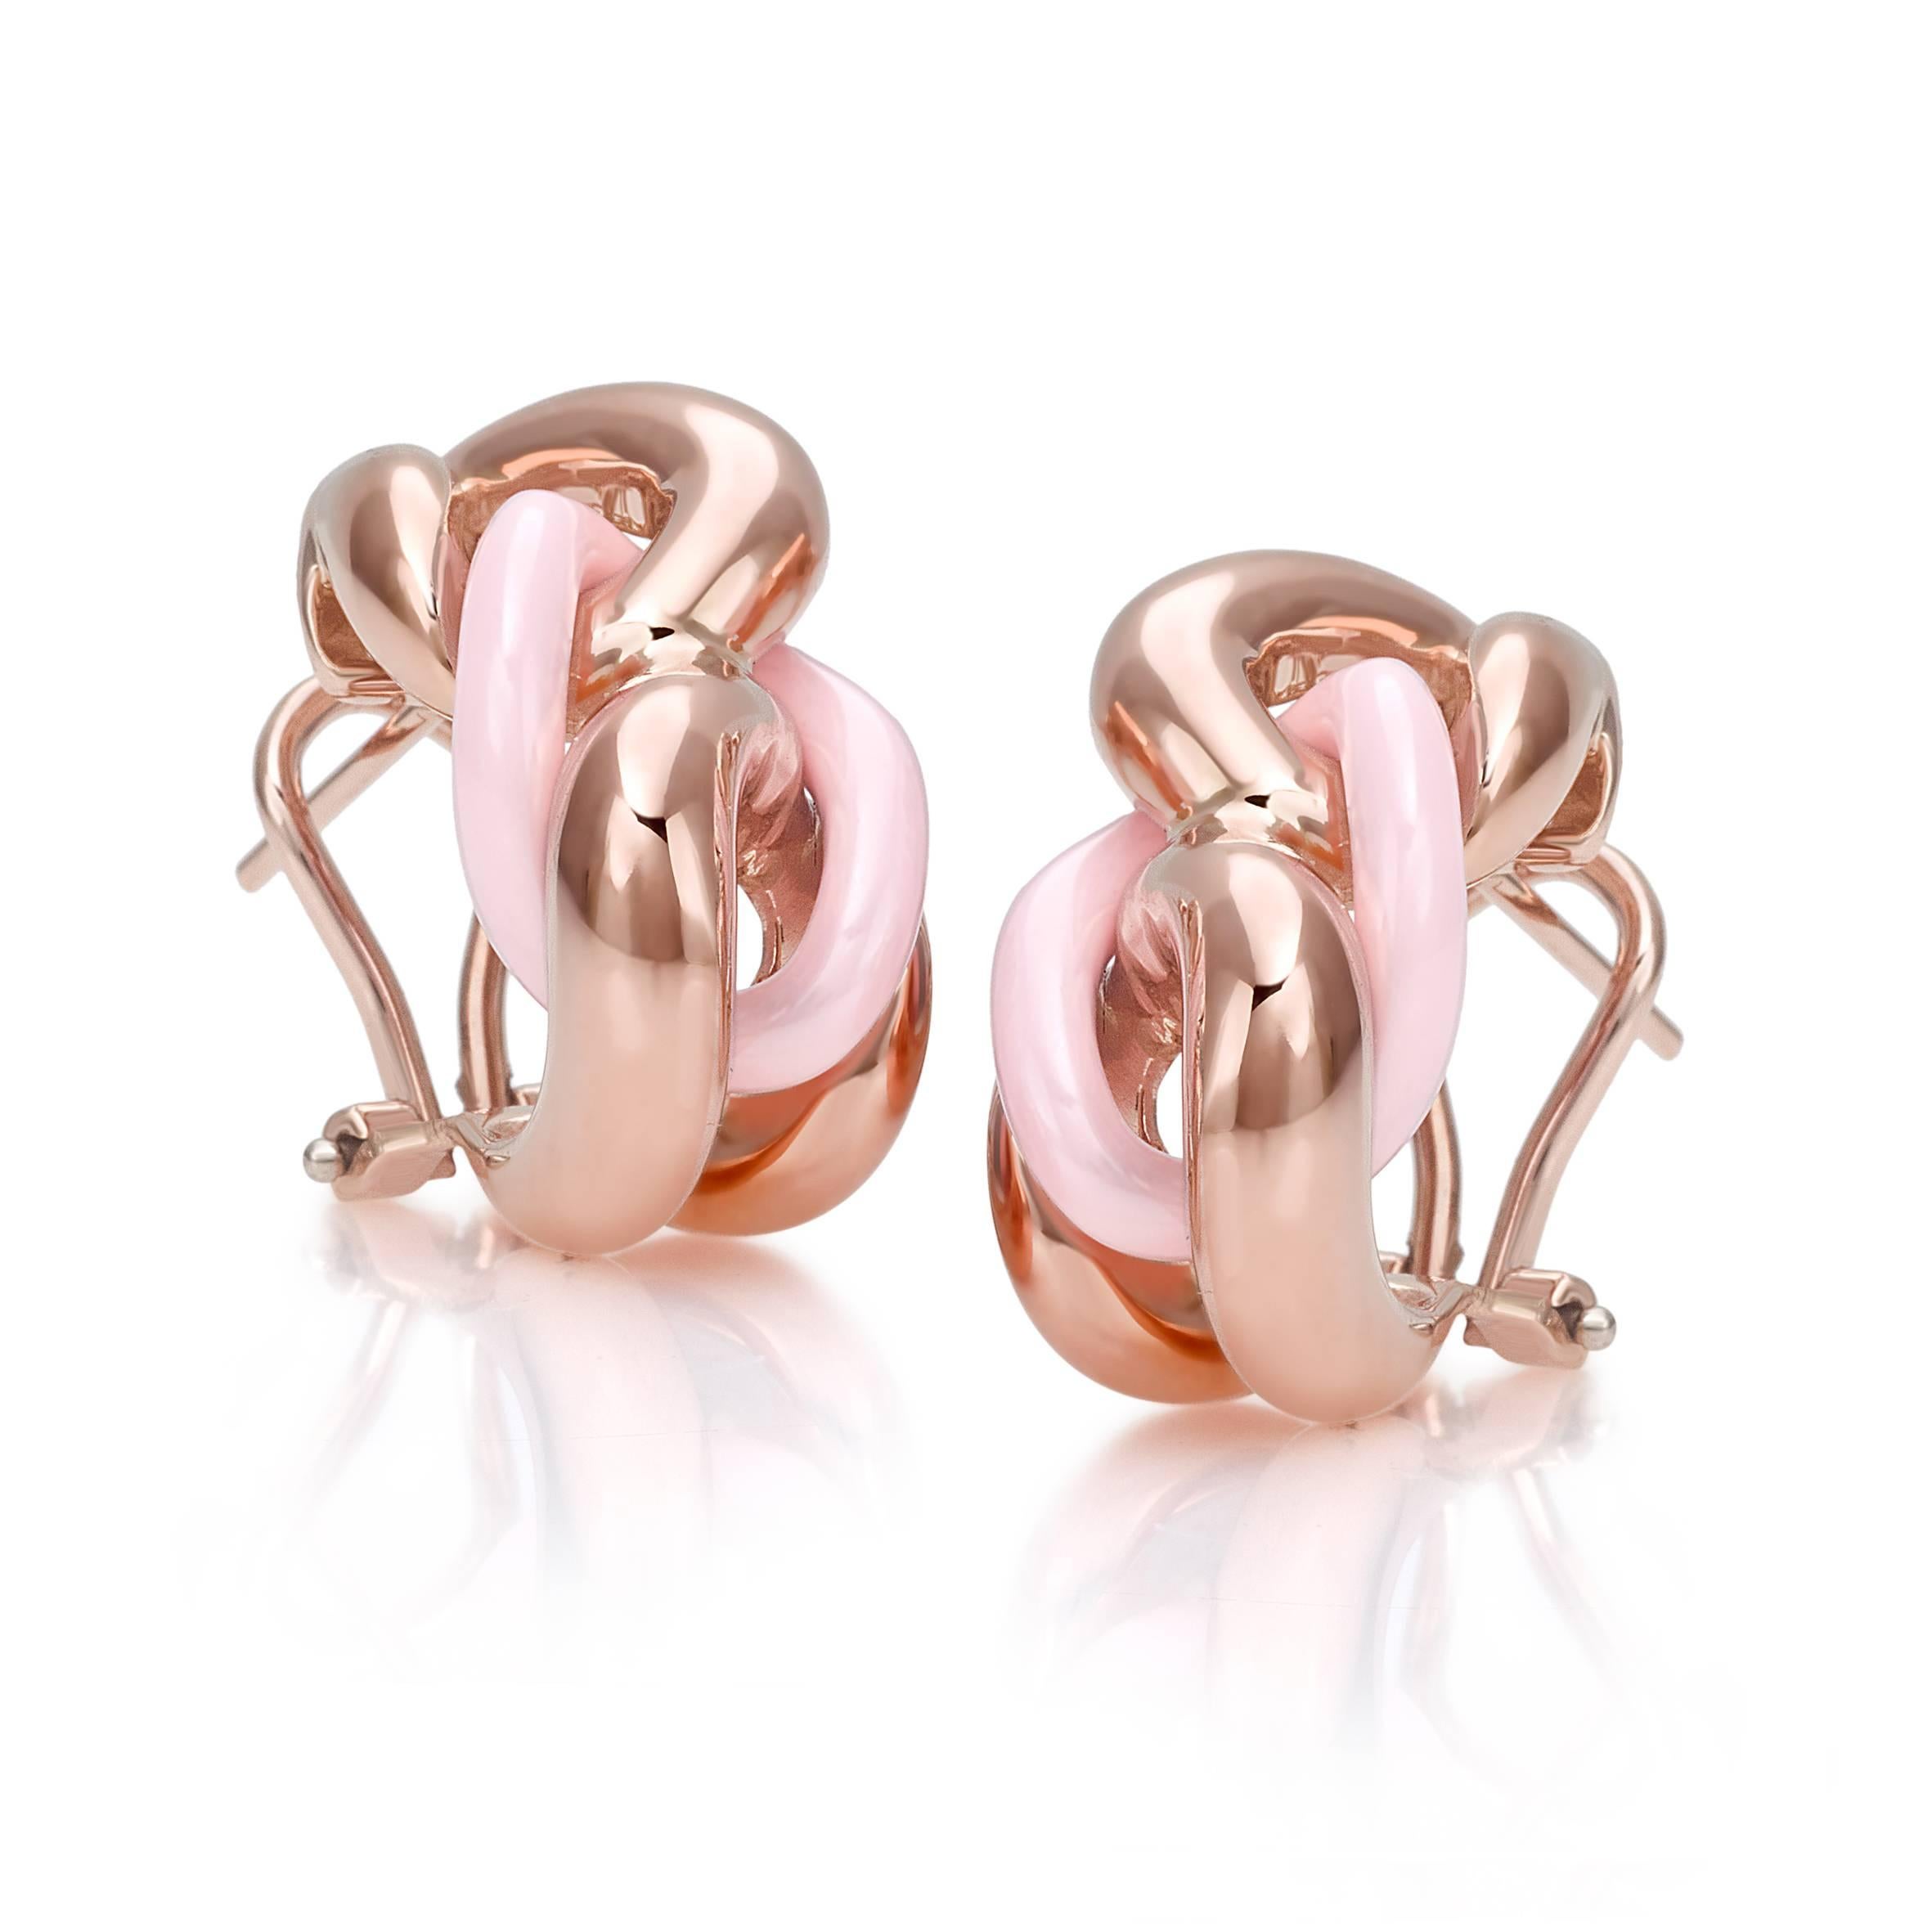 Pink ceramic groumette pair of earrings in 18 kt rose gold
The ceramic is a very resistant material. 
This iconic collection in Micheletto tradition was originally made only in gold just more or less 10 years ago it became very popular the ceramic